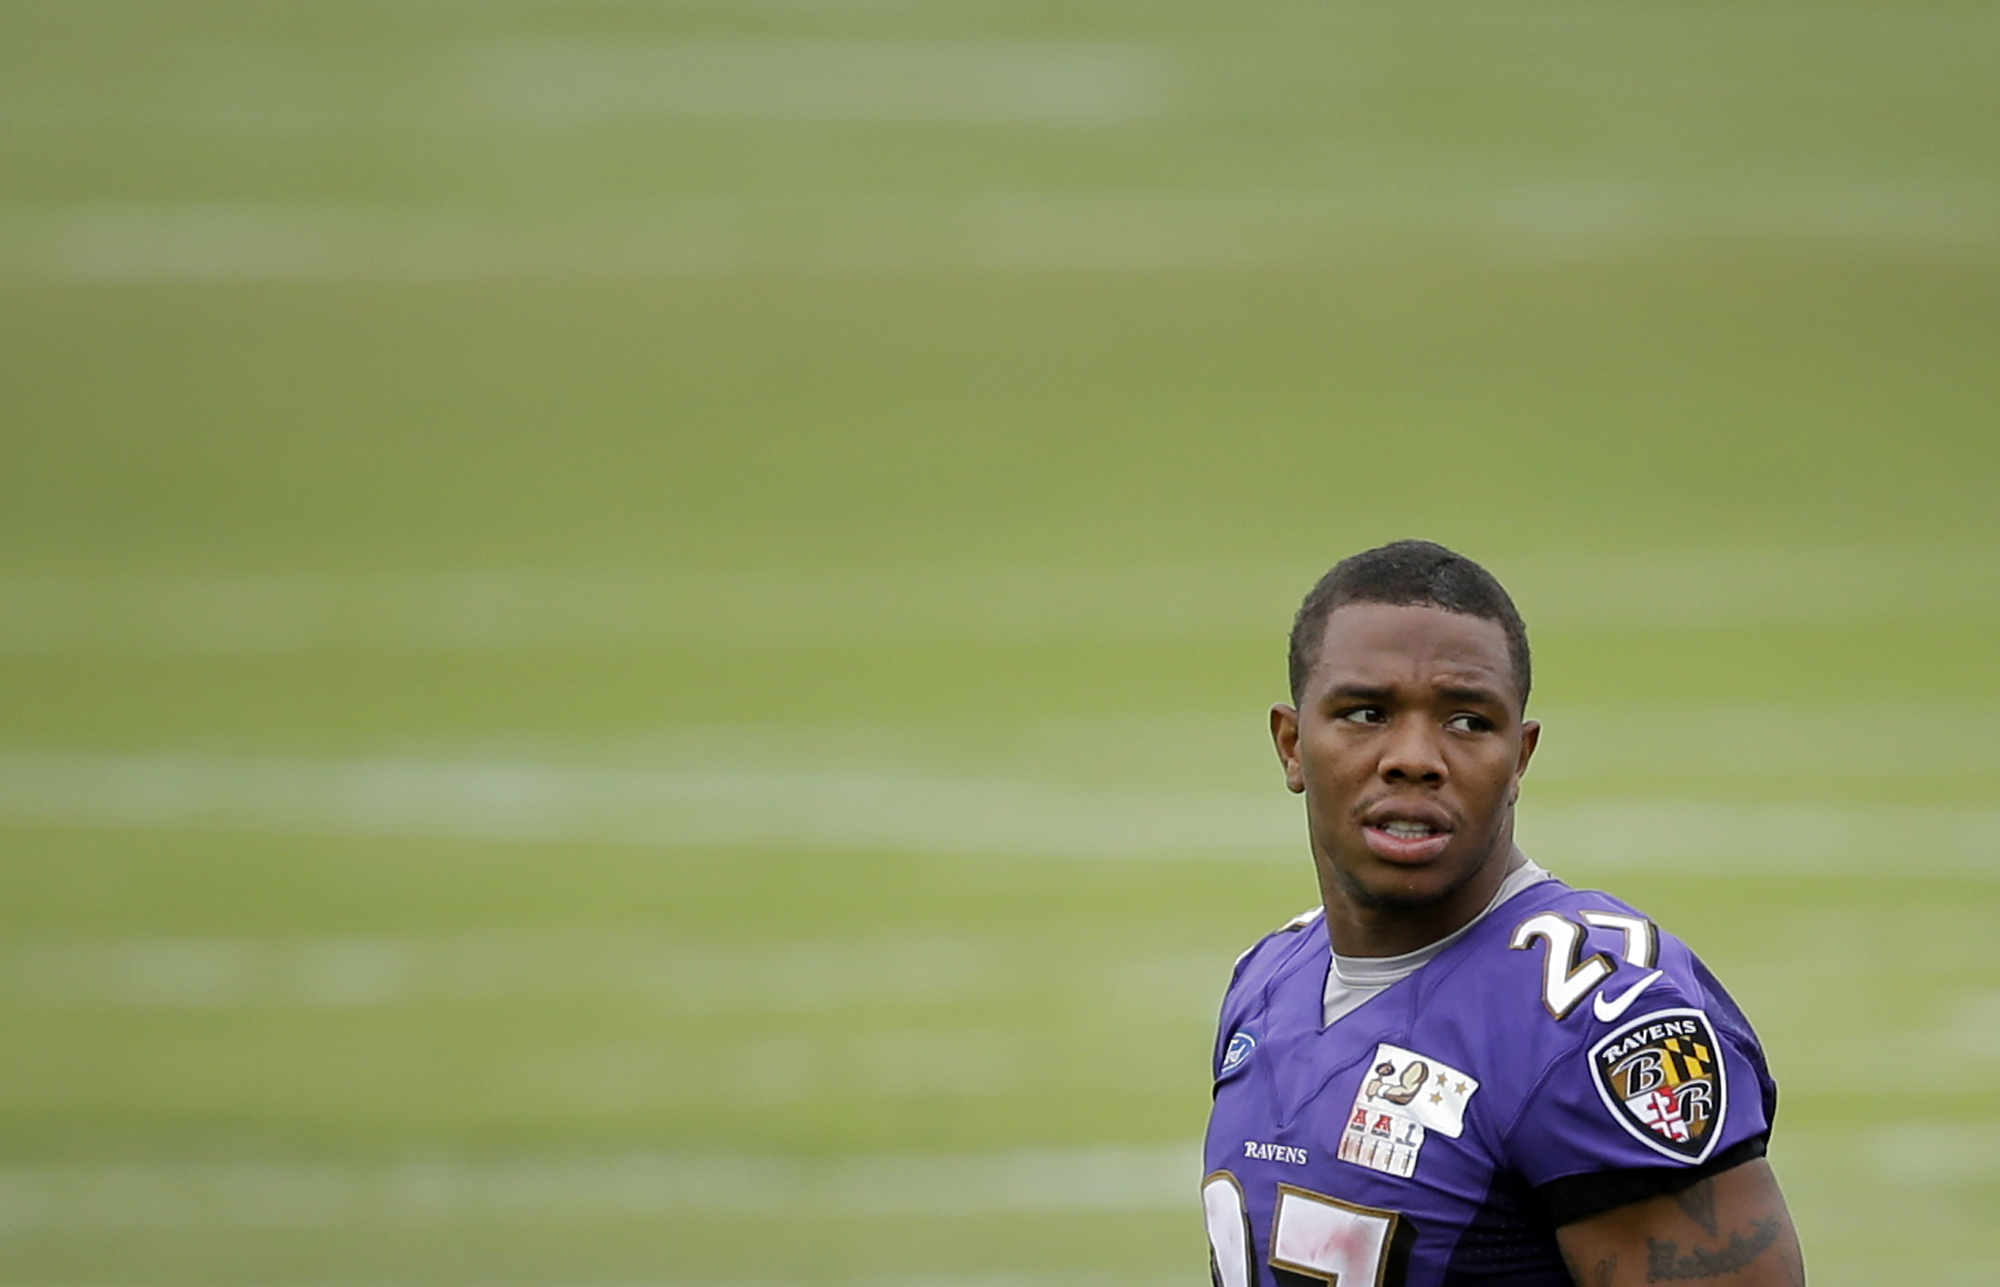 Baltimore Ravens running back Ray Rice walks on the field after a training camp practice on July 24, 2014, at the team's practice facility in Owings Mills, Md. (AP)